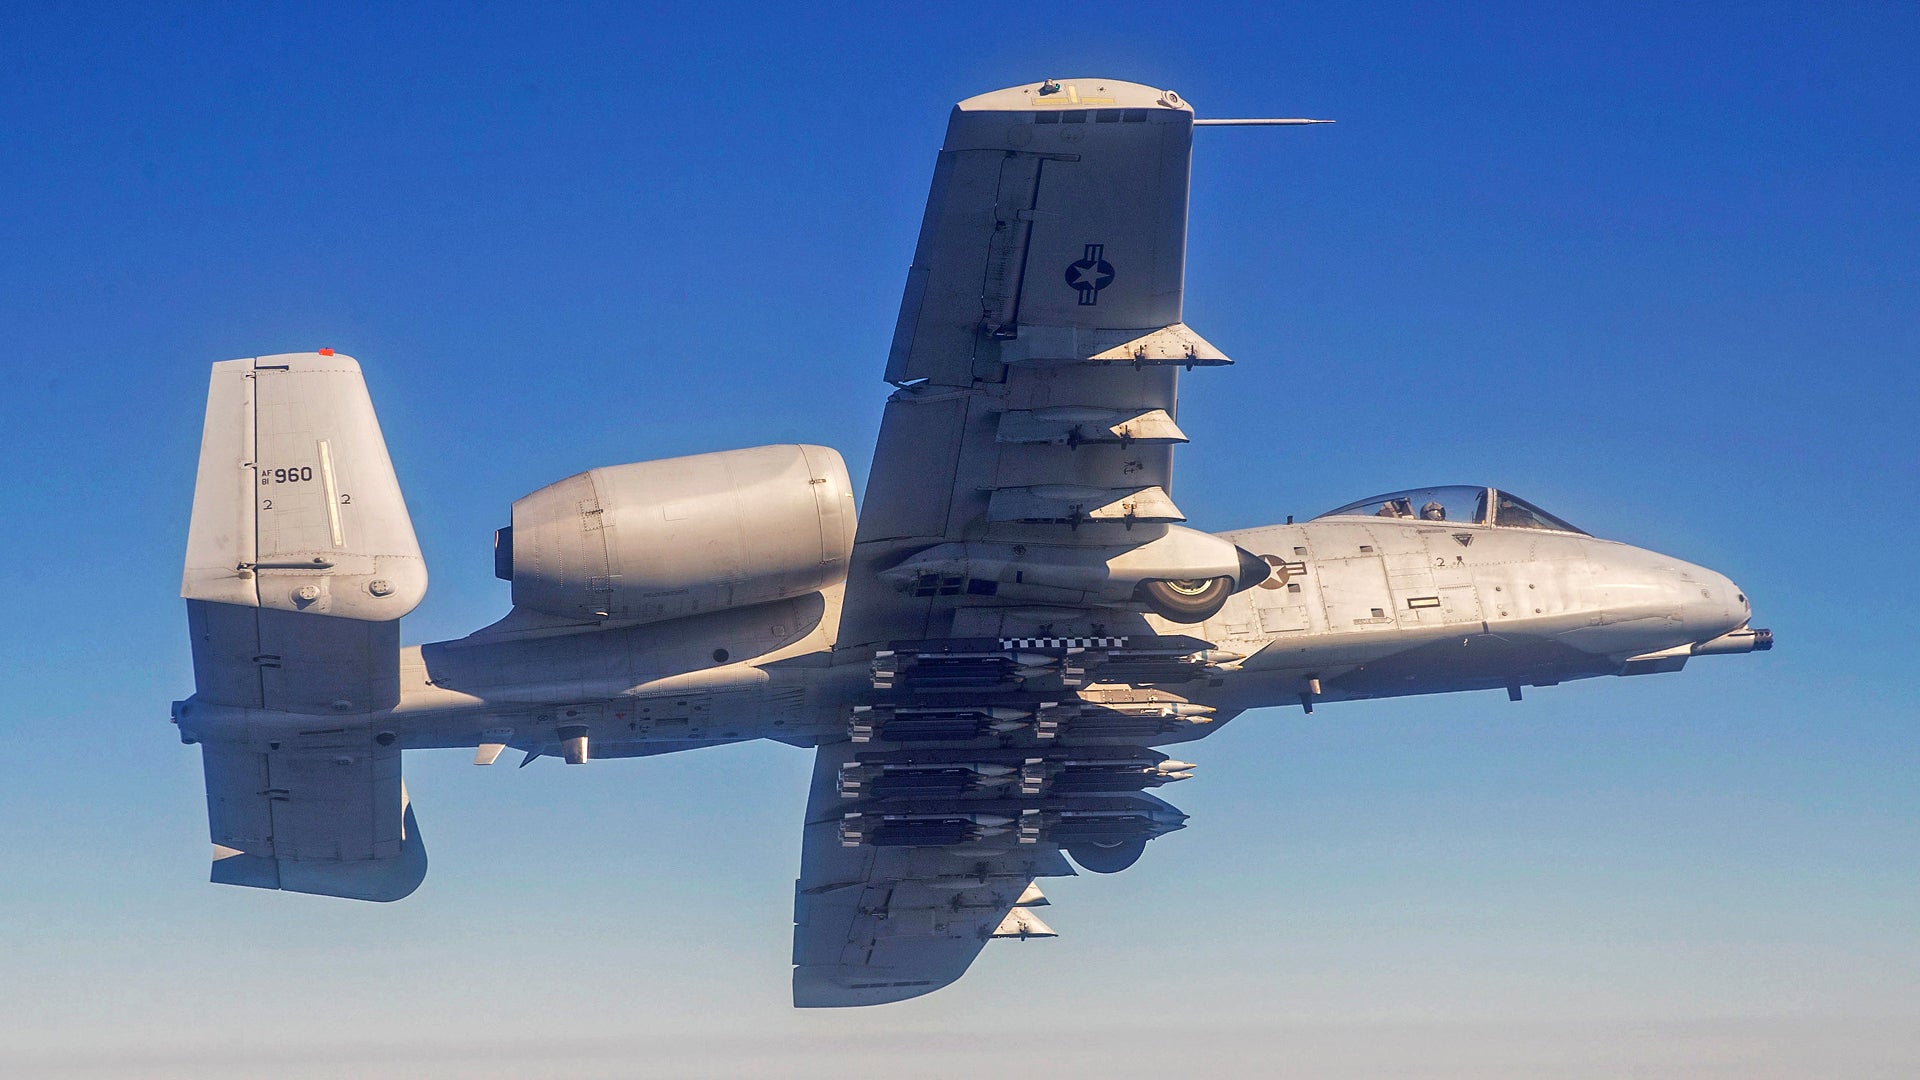 Maj Eric Hickernell from the 40th Flight Test Squadron flies an A-10C Thunderbolt II with Small-Diameter Bombs during a test near Eglin Air Force Base, Fla, Feb 9, 2022. The 96th Test Wing executes developmental tests of the A-10C, and improves its capability of carrying precision guided munitions and unguided munitions.  (U.S. Air Force Photo by Tech. Sgt. John Raven)